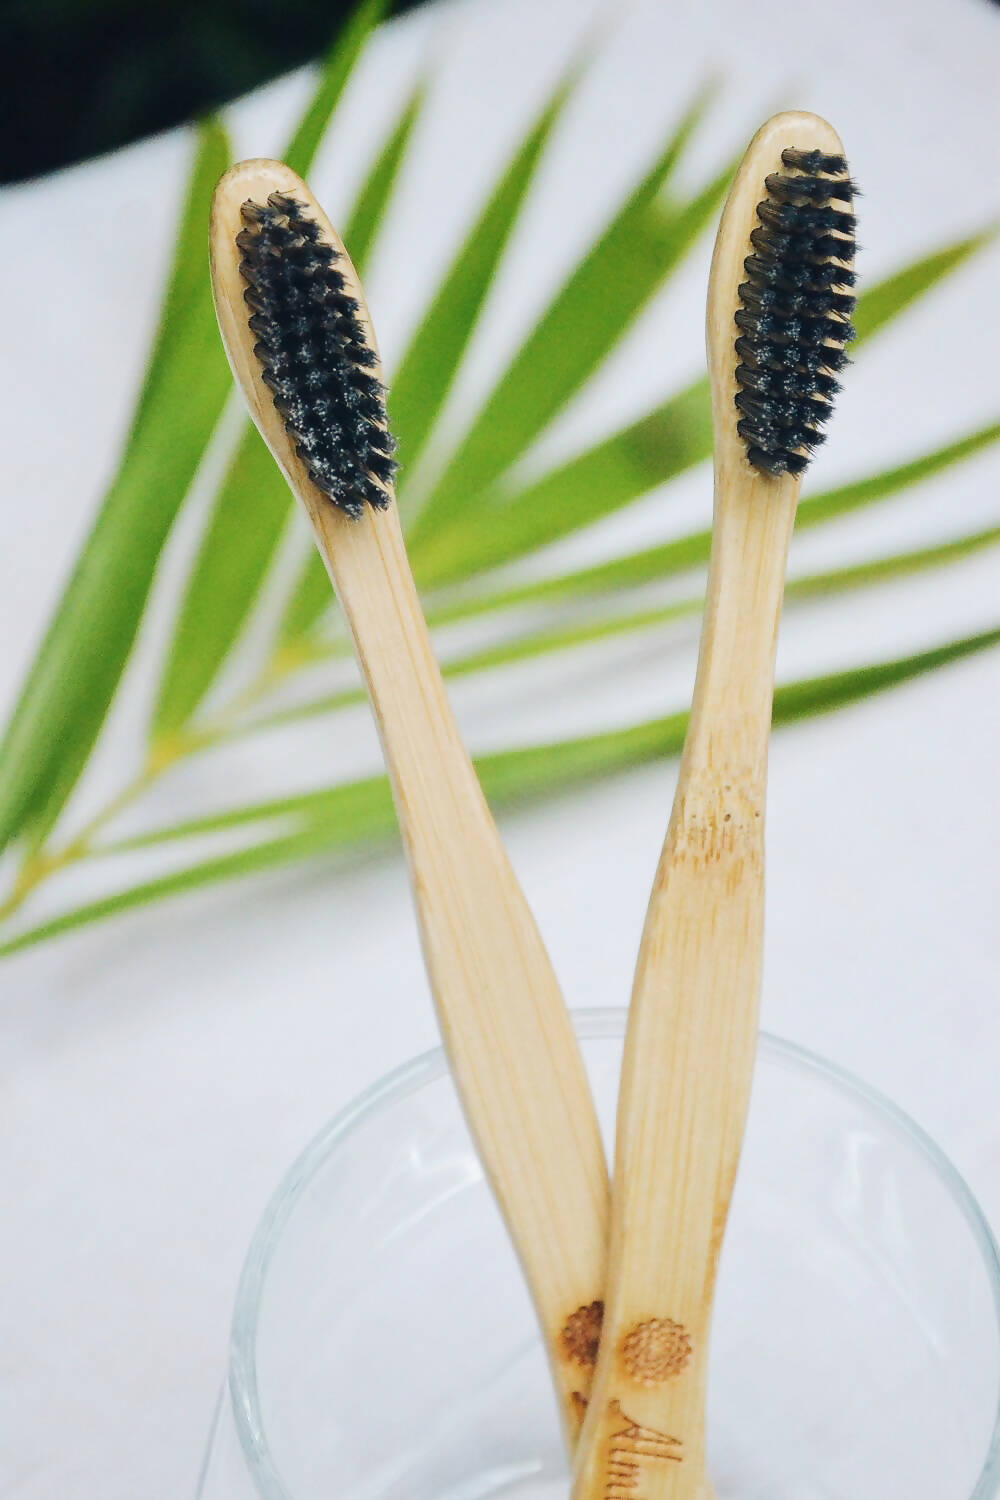 Oral Care Set Ã¢â‚¬â€œ Charcoal Bamboo Toothbrush and Copper Tongue Cleaner (Pack of 2)